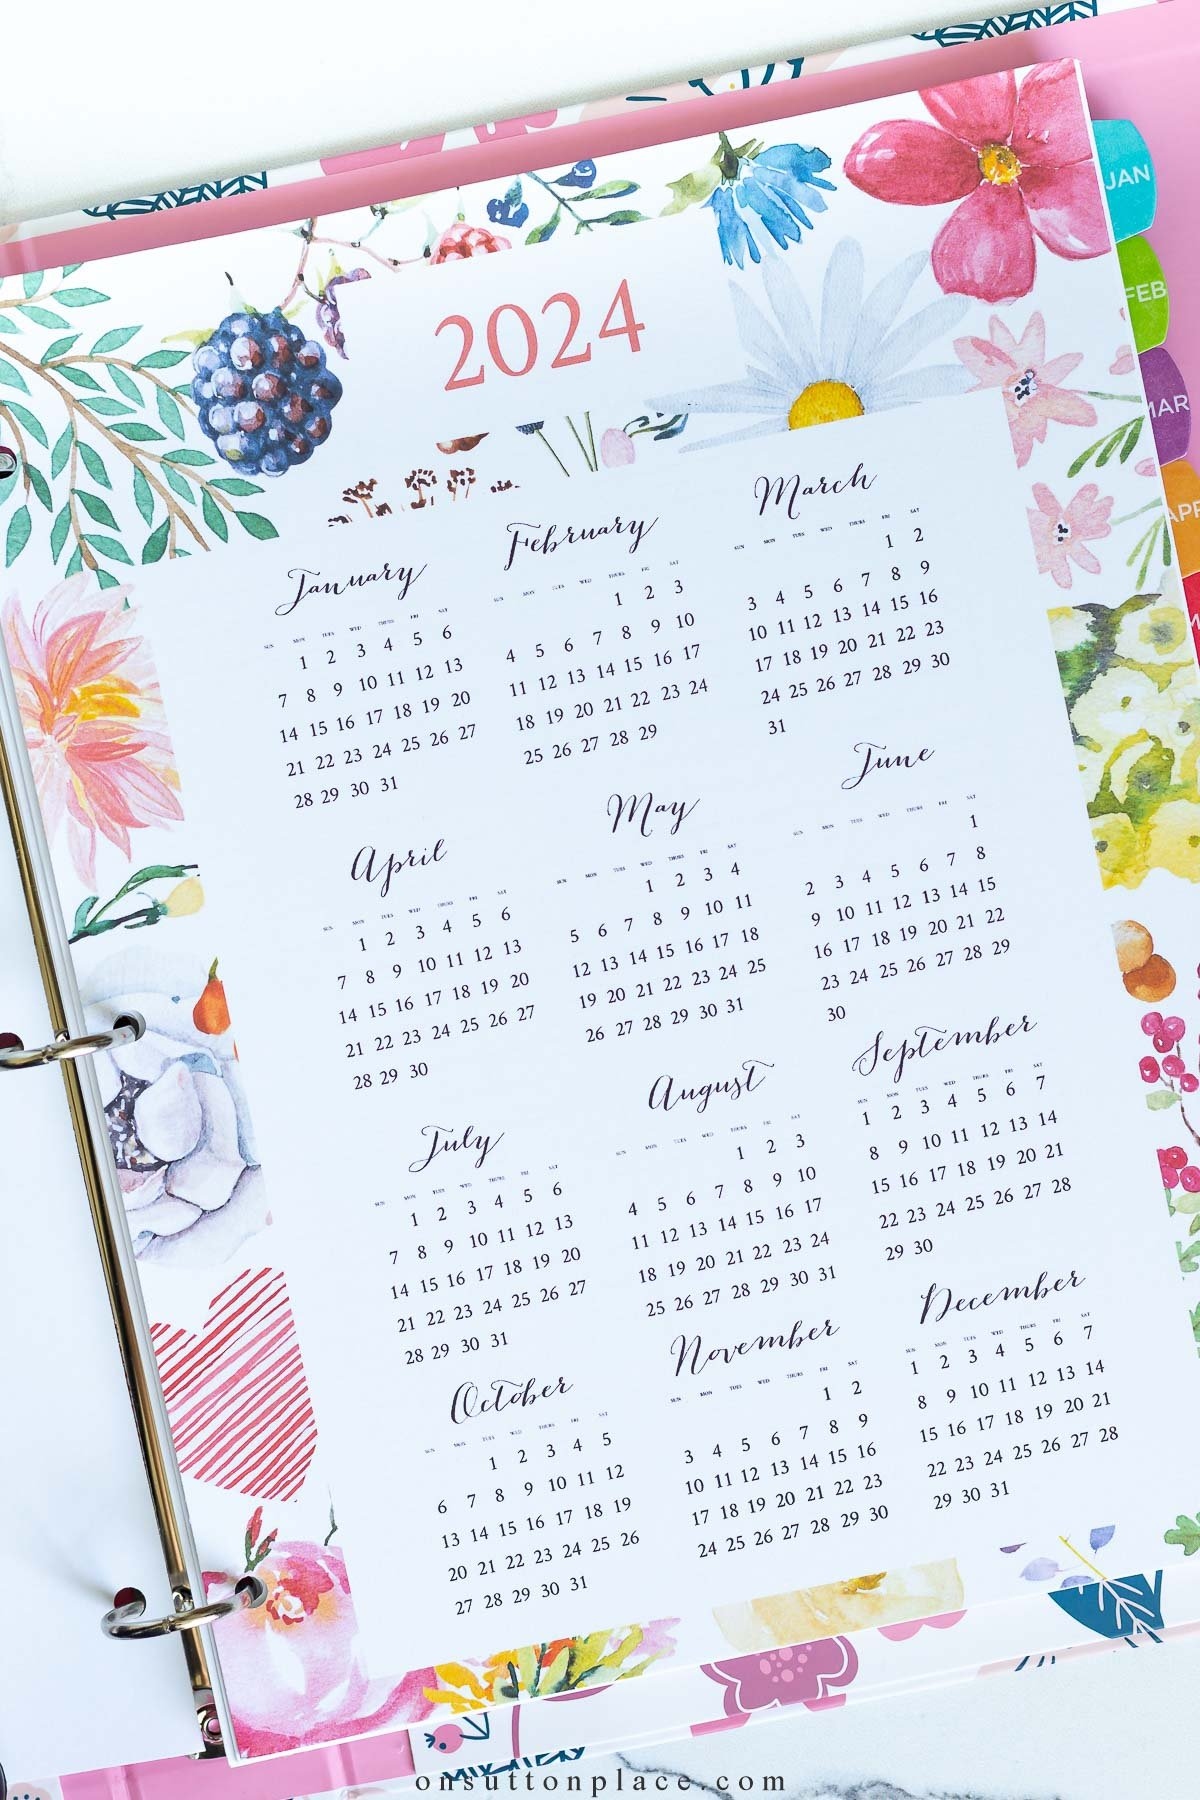 2024 Free Printable Calendar With Planner Pages - On Sutton Place regarding Free Printable Calendar 2024 Hong Kong